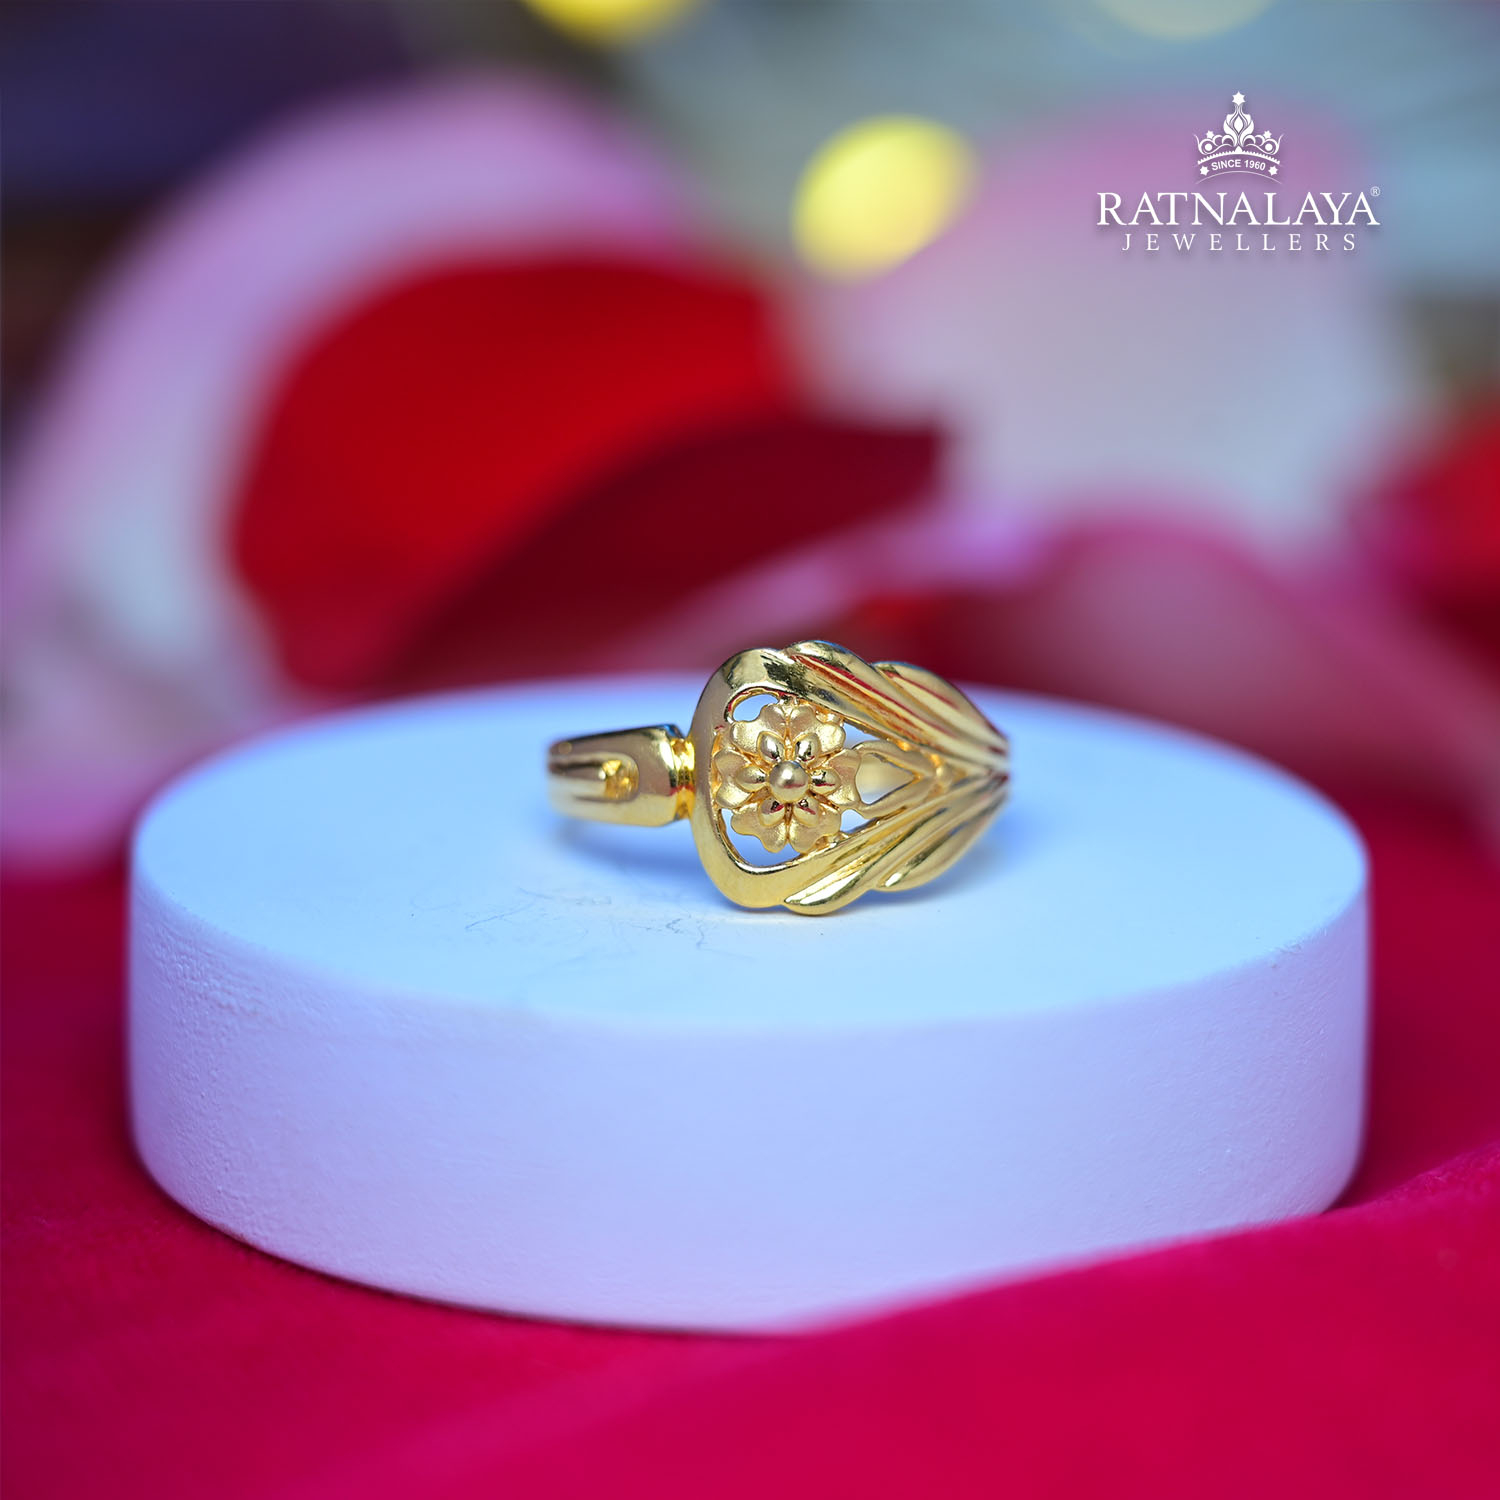 Yellow Gold Finger Ring For Women | SEHGAL GOLD ORNAMENTS PVT. LTD.